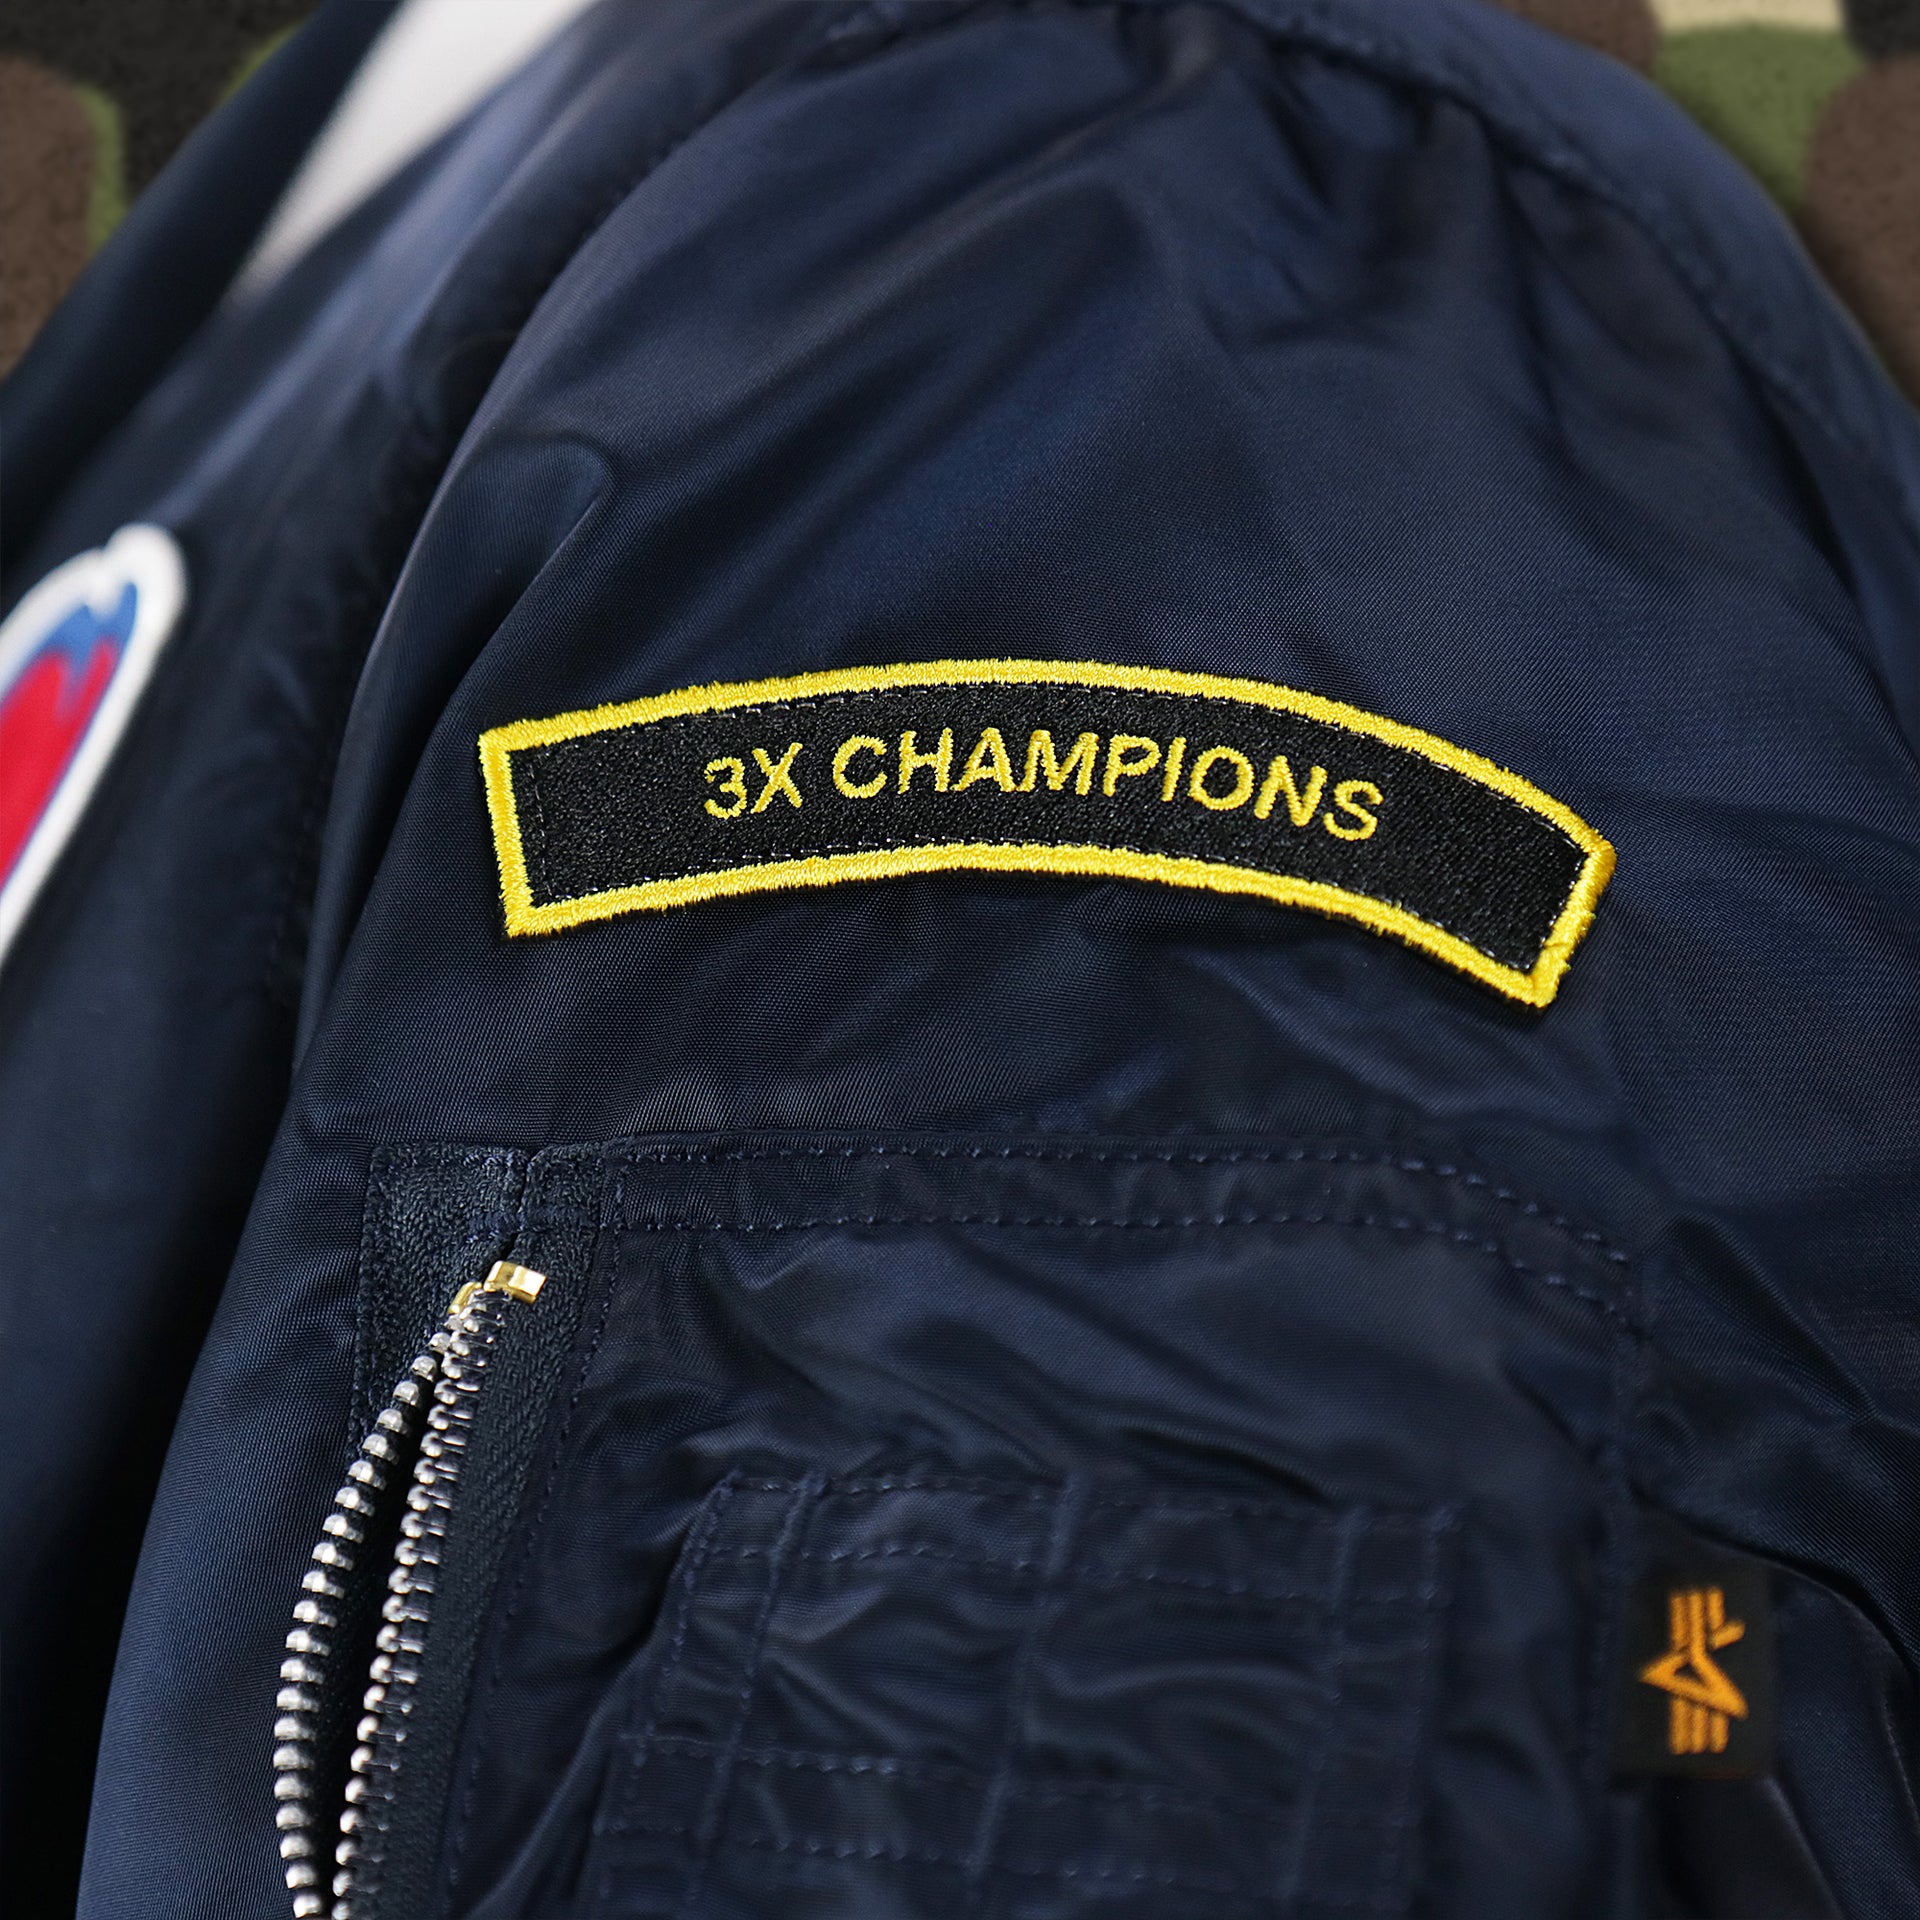 The 3x Champions Side Patch on the Atlanta Braves MLB Patch Alpha Industries Reversible Bomber Jacket With Camo Liner | Navy Blue Bomber Jacket